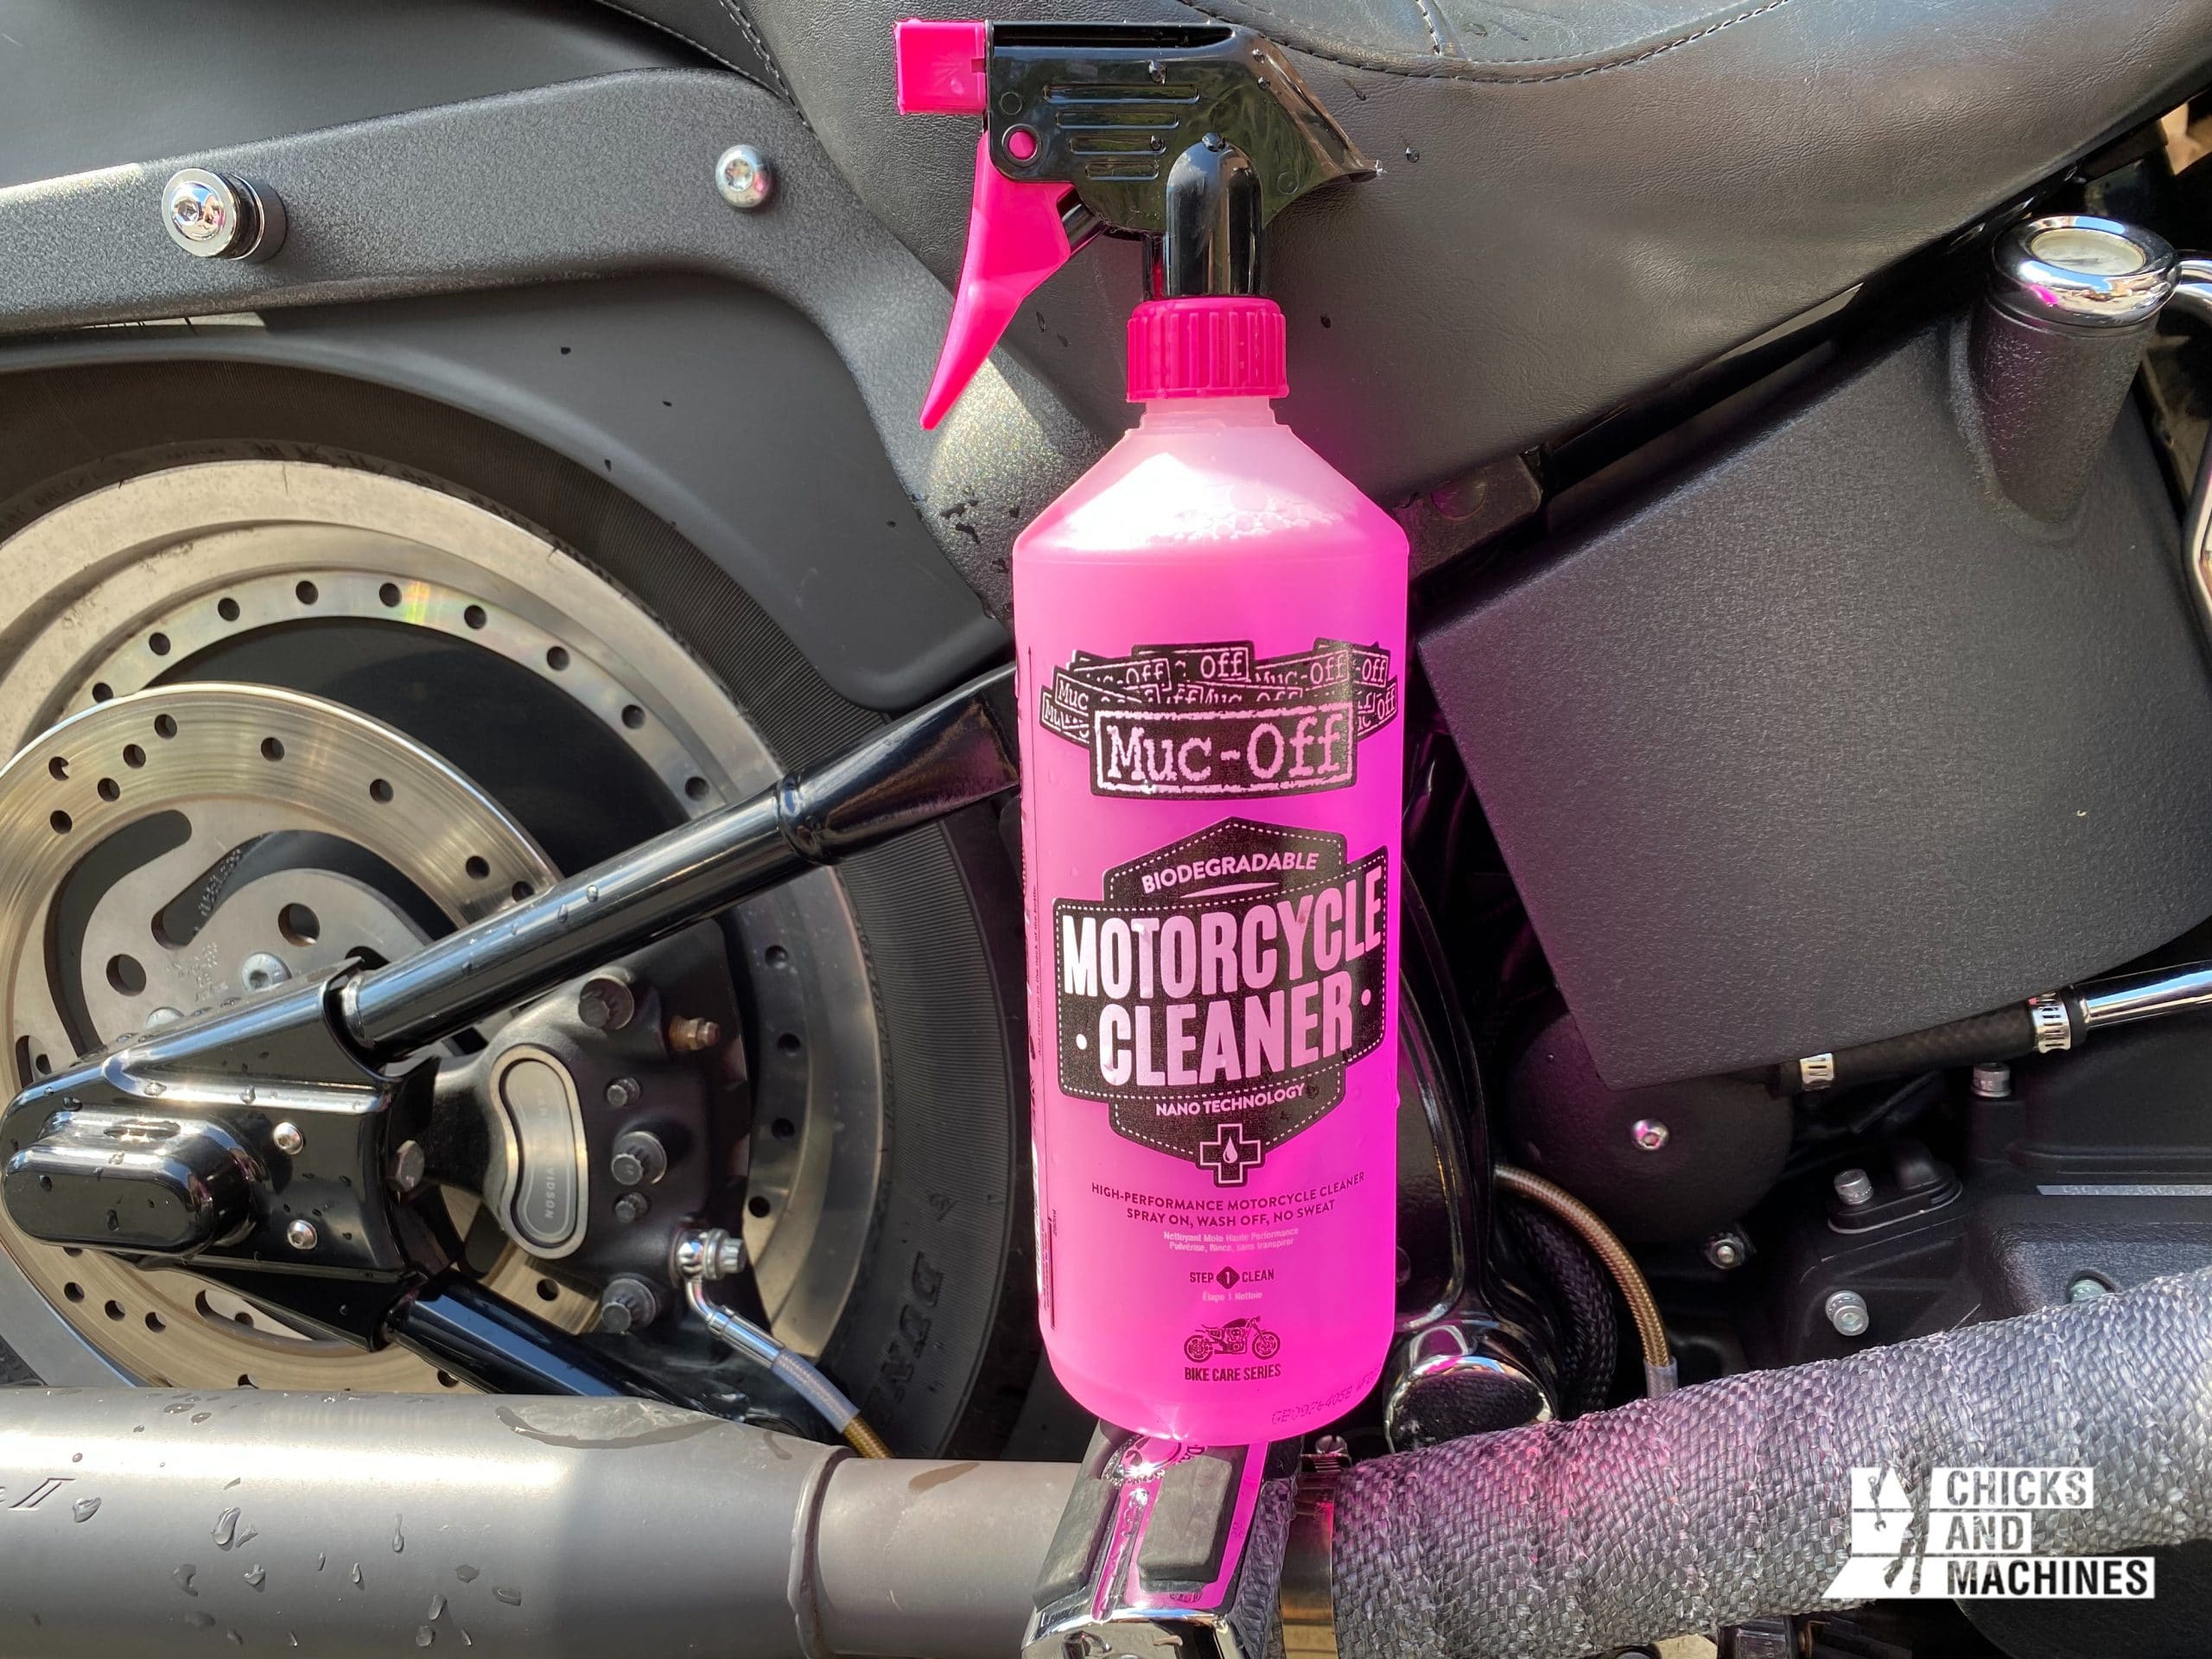 The first product used: motorcycle cleaning soap